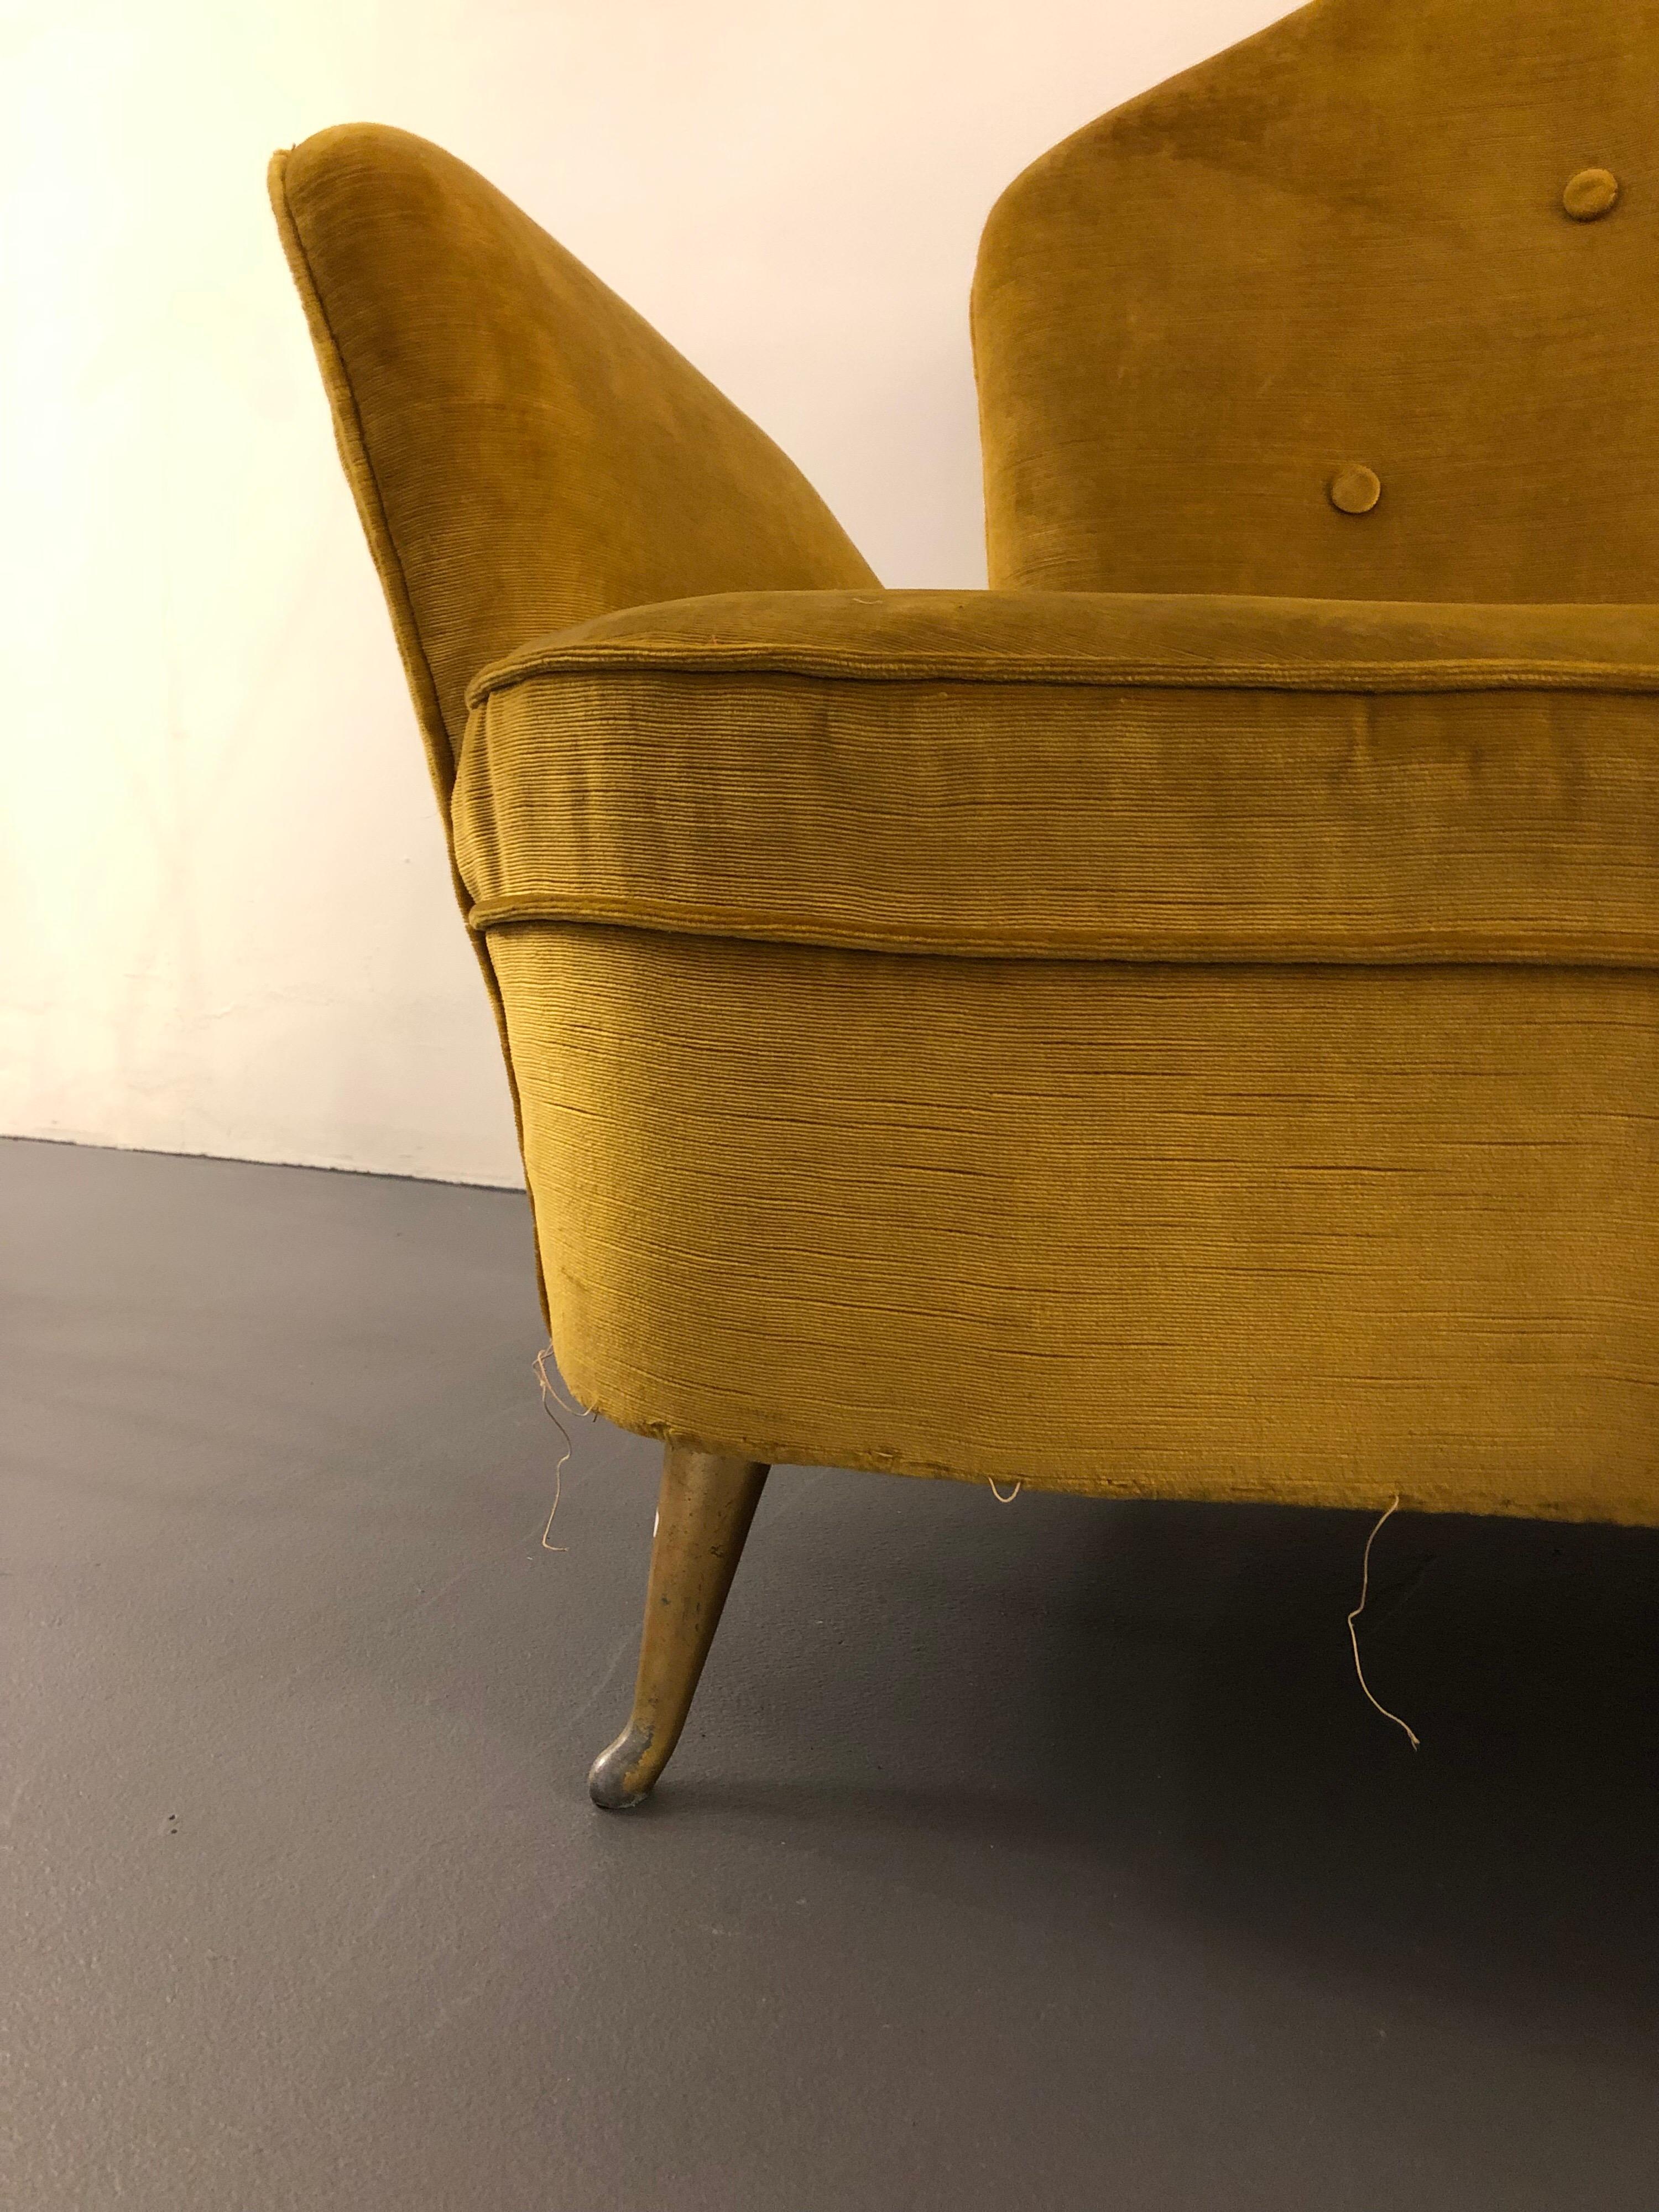 Brass Set of Italian Midcentury Sofa and Armchairs by Isa Bergamo, 1950s For Sale